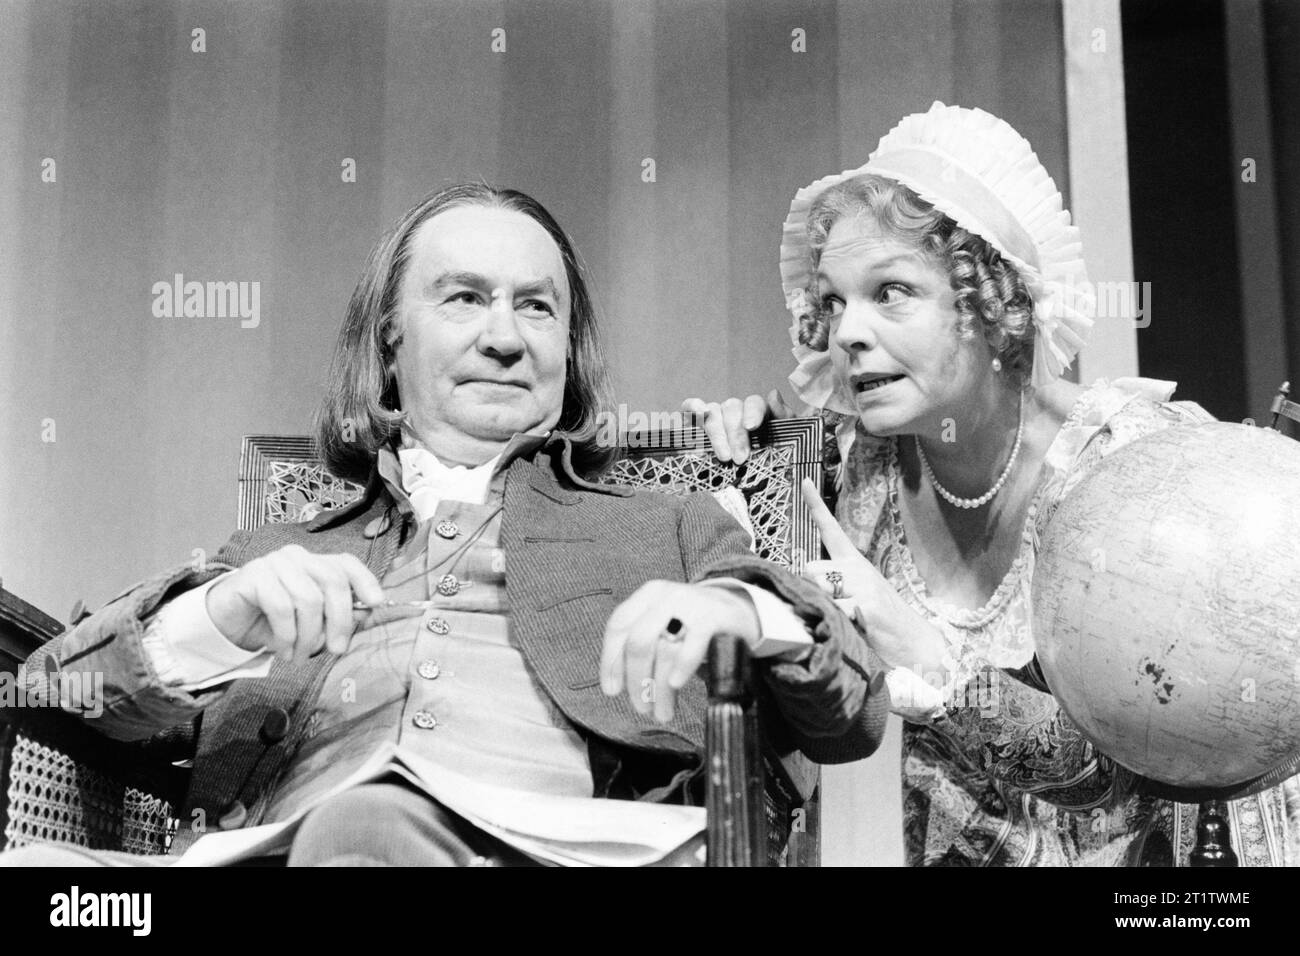 Peter Sallis (Mr Bennet), Pauline Yates (Mrs Bennet) in PRIDE AND PREJUDICE by Jane Austen at the Old Vic, London SE1  29/09/1986  adapted by David Pownall  design: Poppy Mitchell  lighting: Mick Hughes  director: Bill Pryde Stock Photo